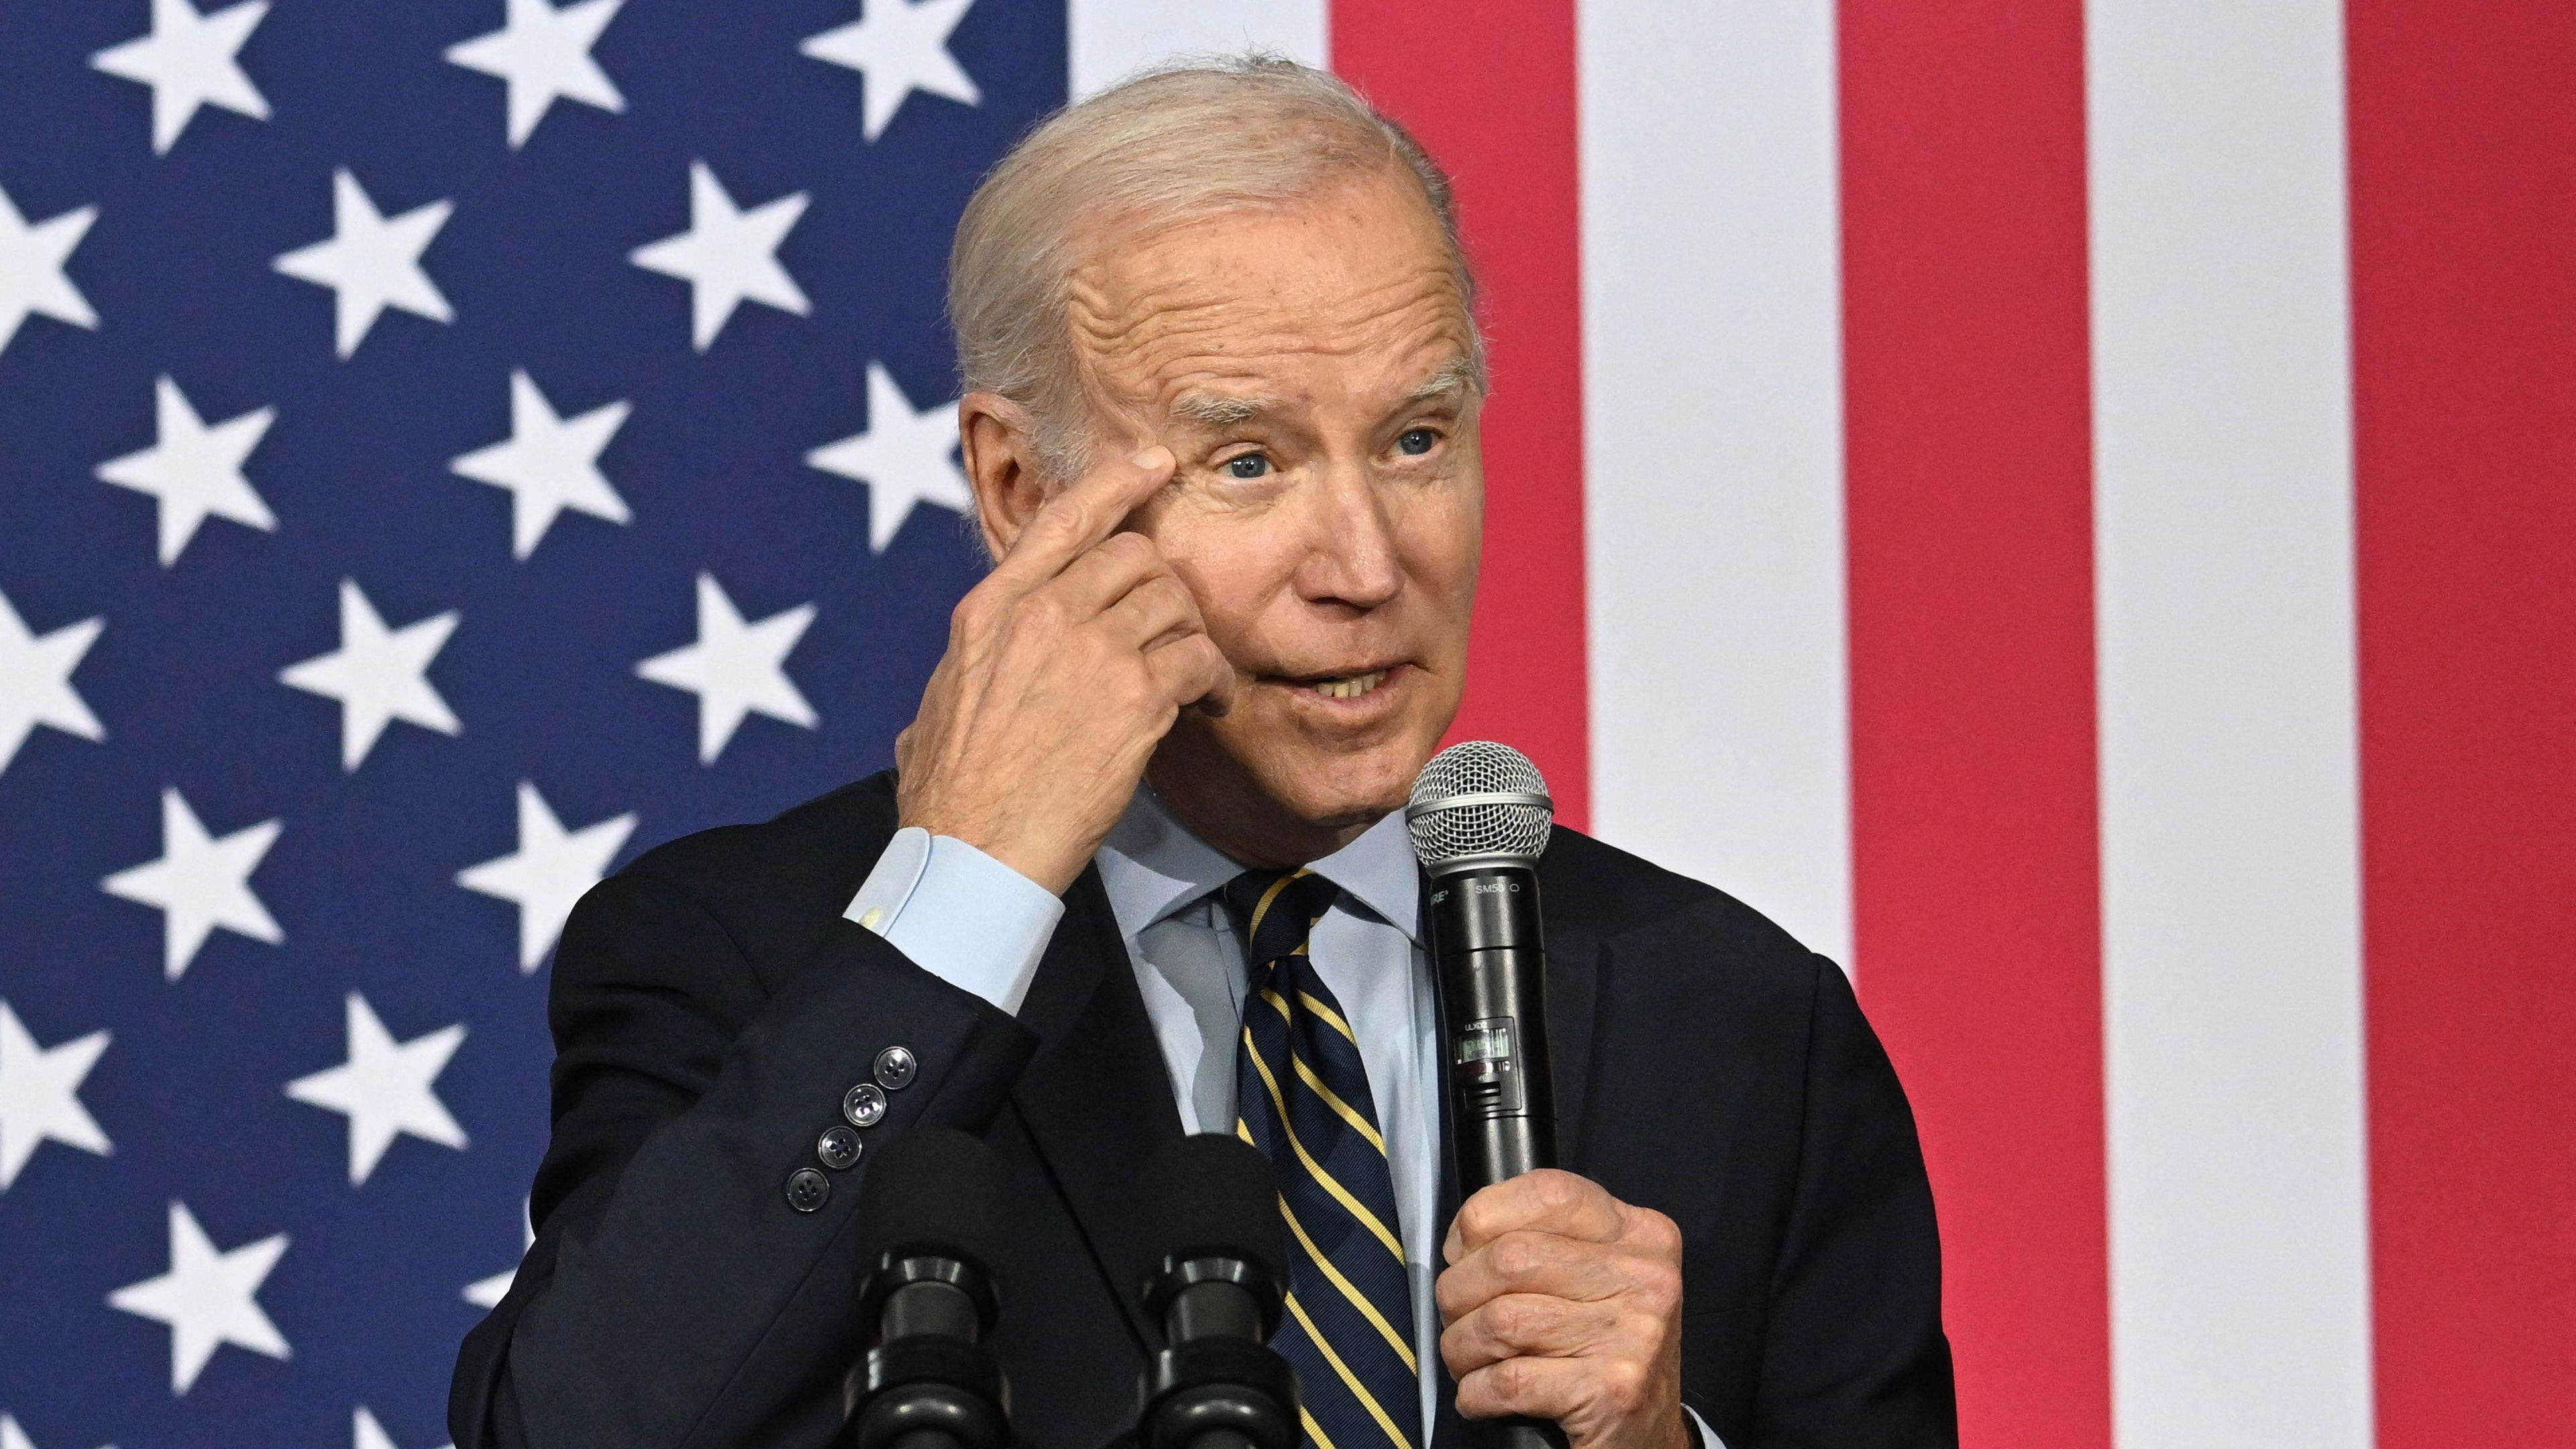 Does Congress trust Biden, Harris to oversee AI? One lawmaker doubts they can 'operate an iPhone'